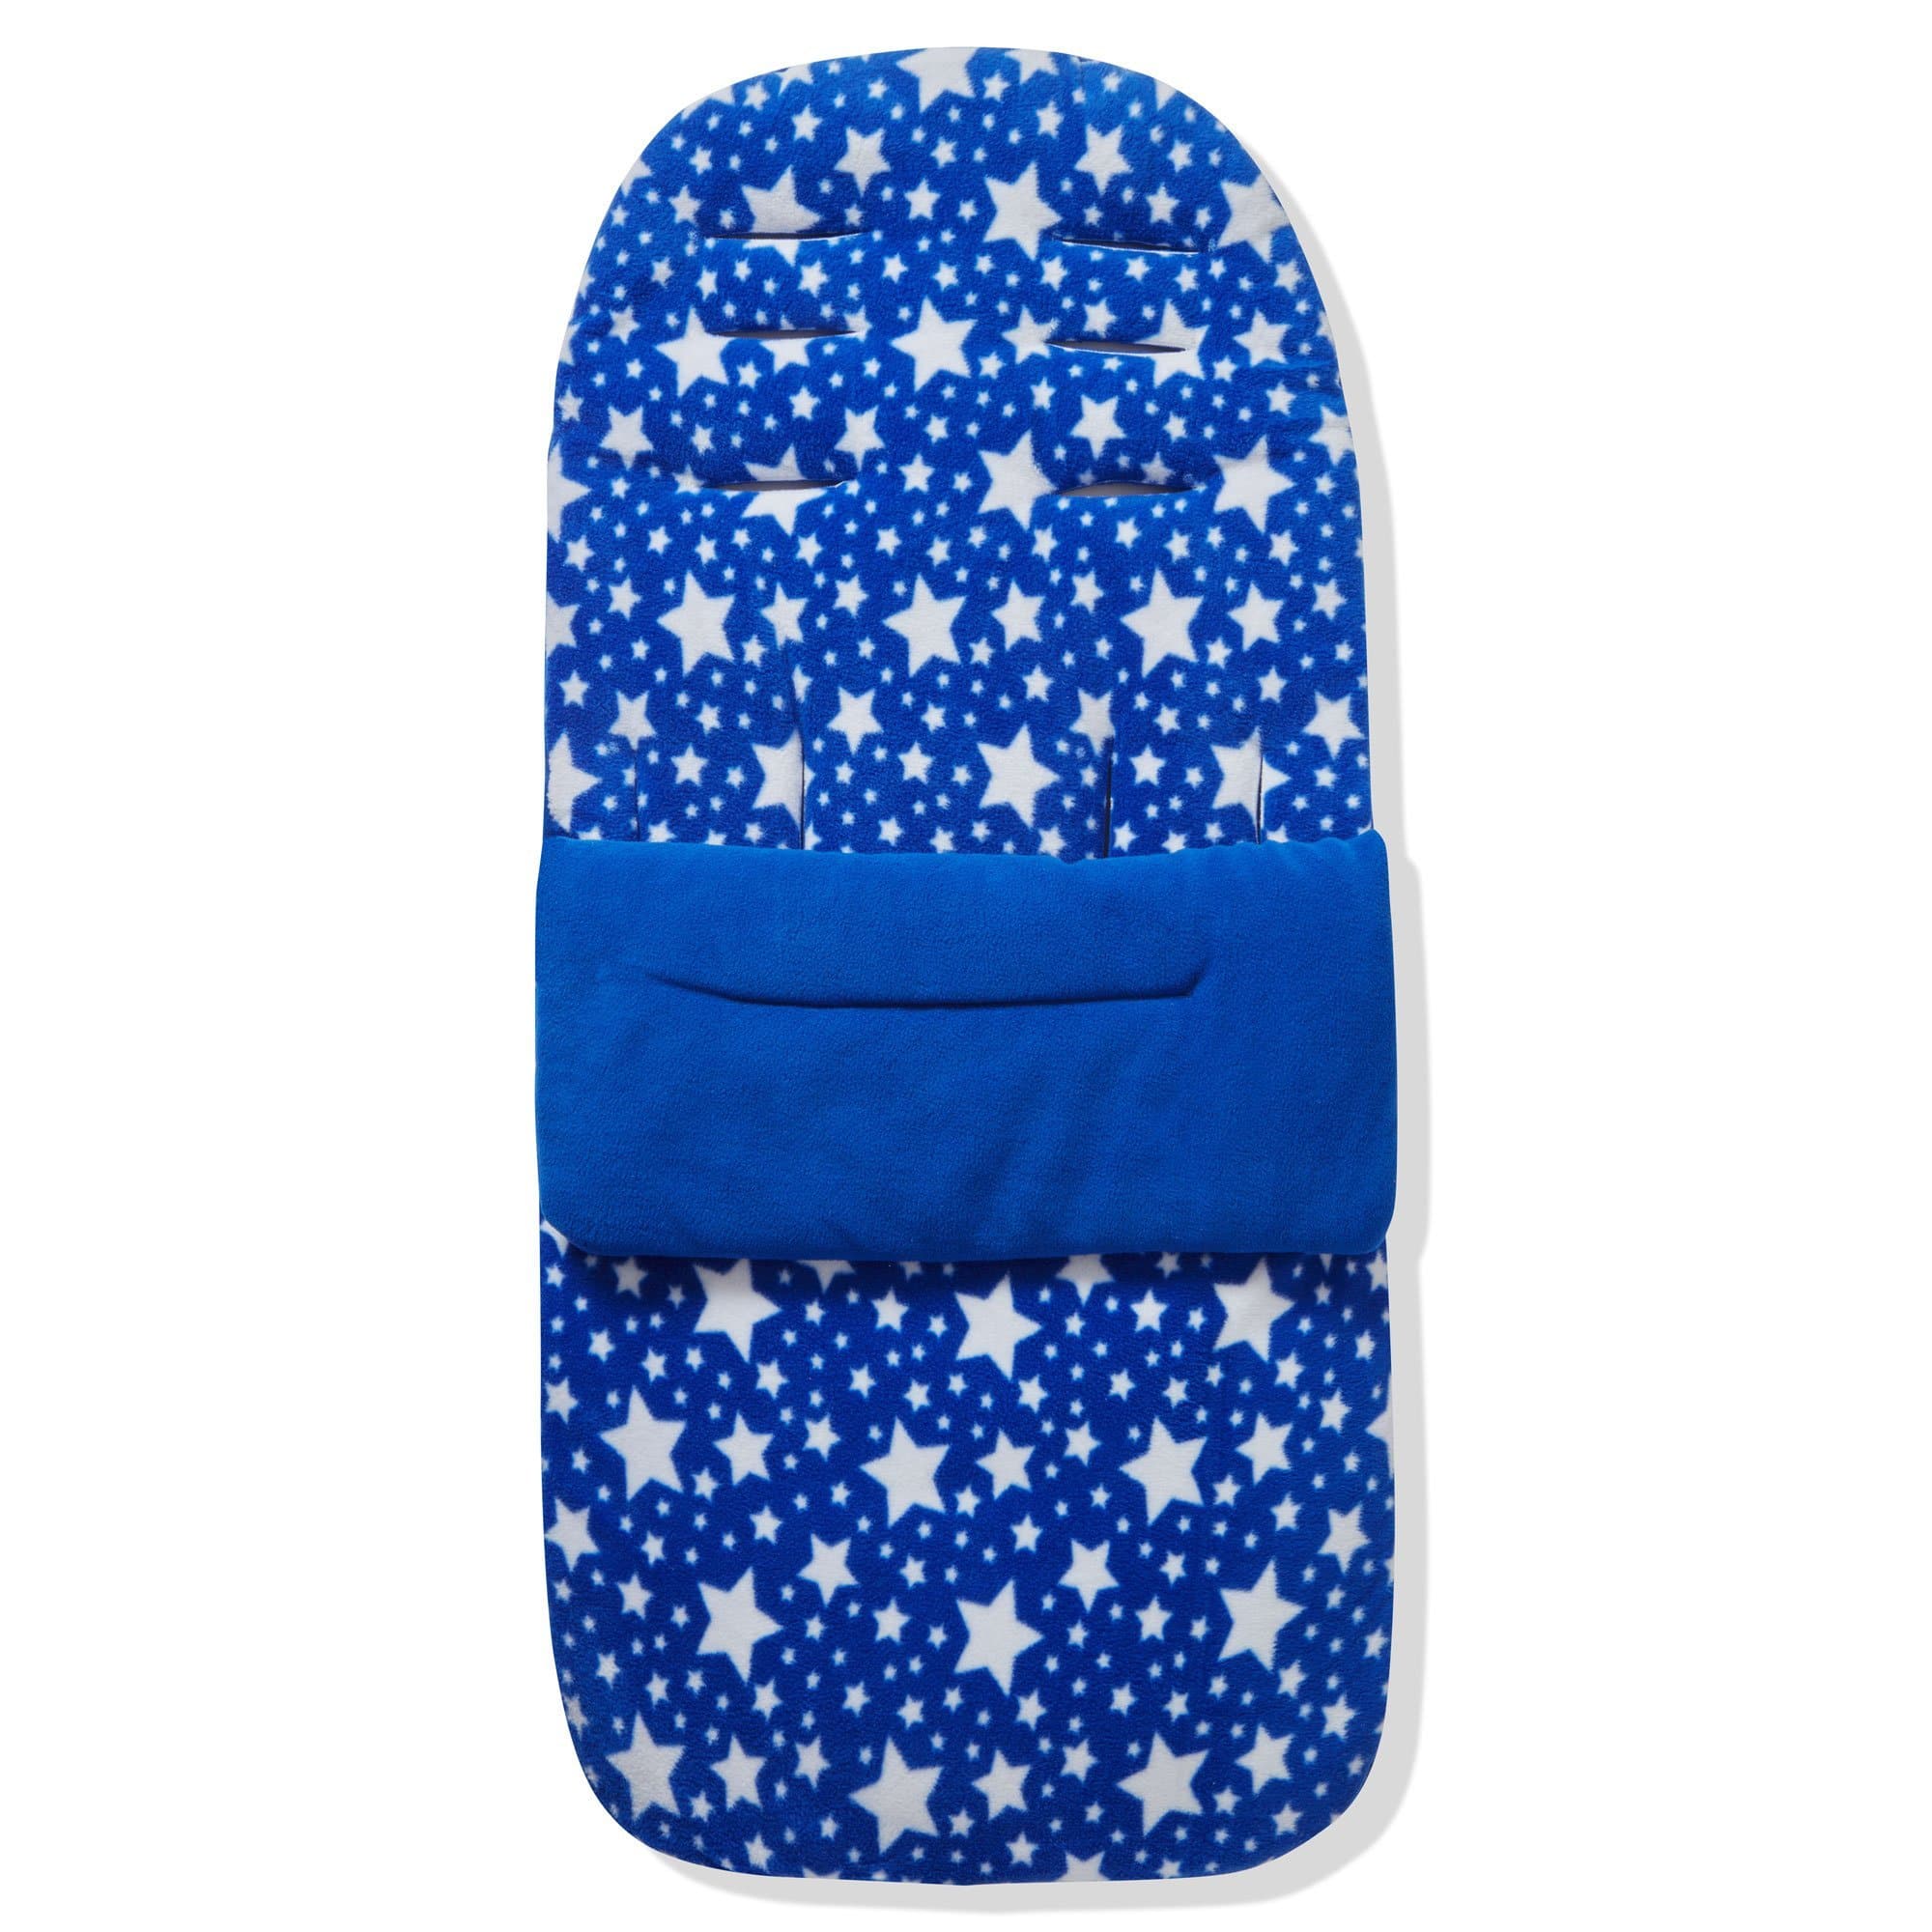 Fleece Footmuff / Cosy Toes Compatible with Hybrid - Blue Star / Fits All Models | For Your Little One